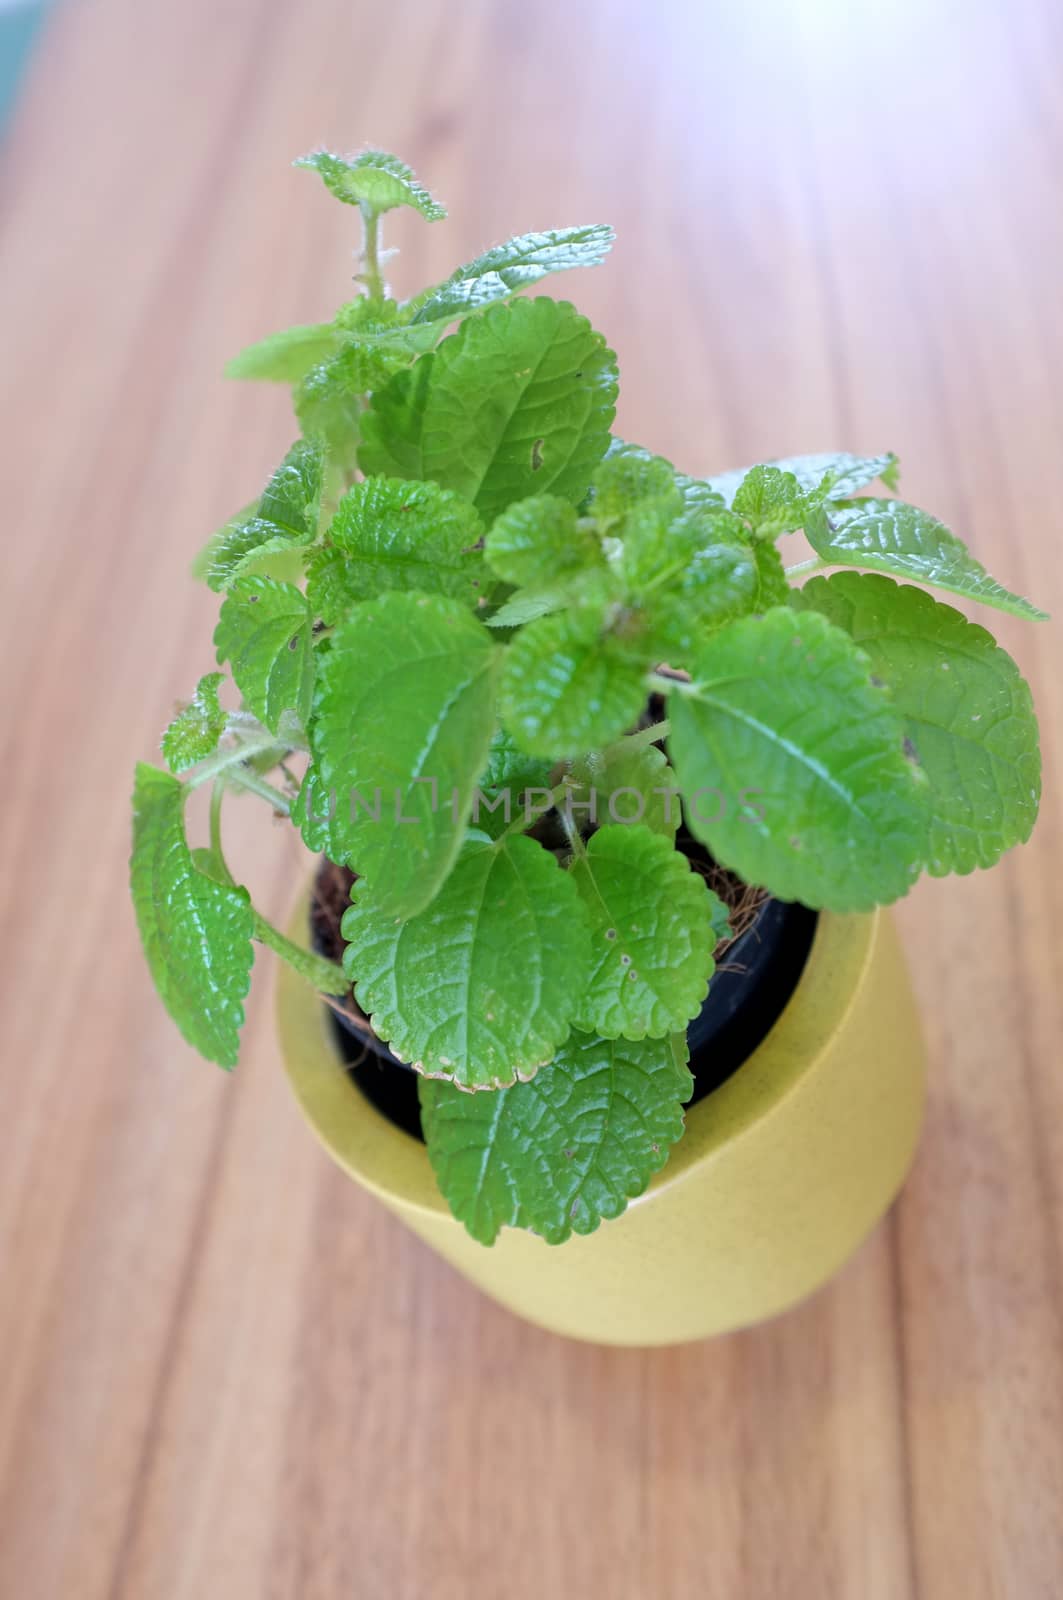 Mint in yellow pot on wooden table